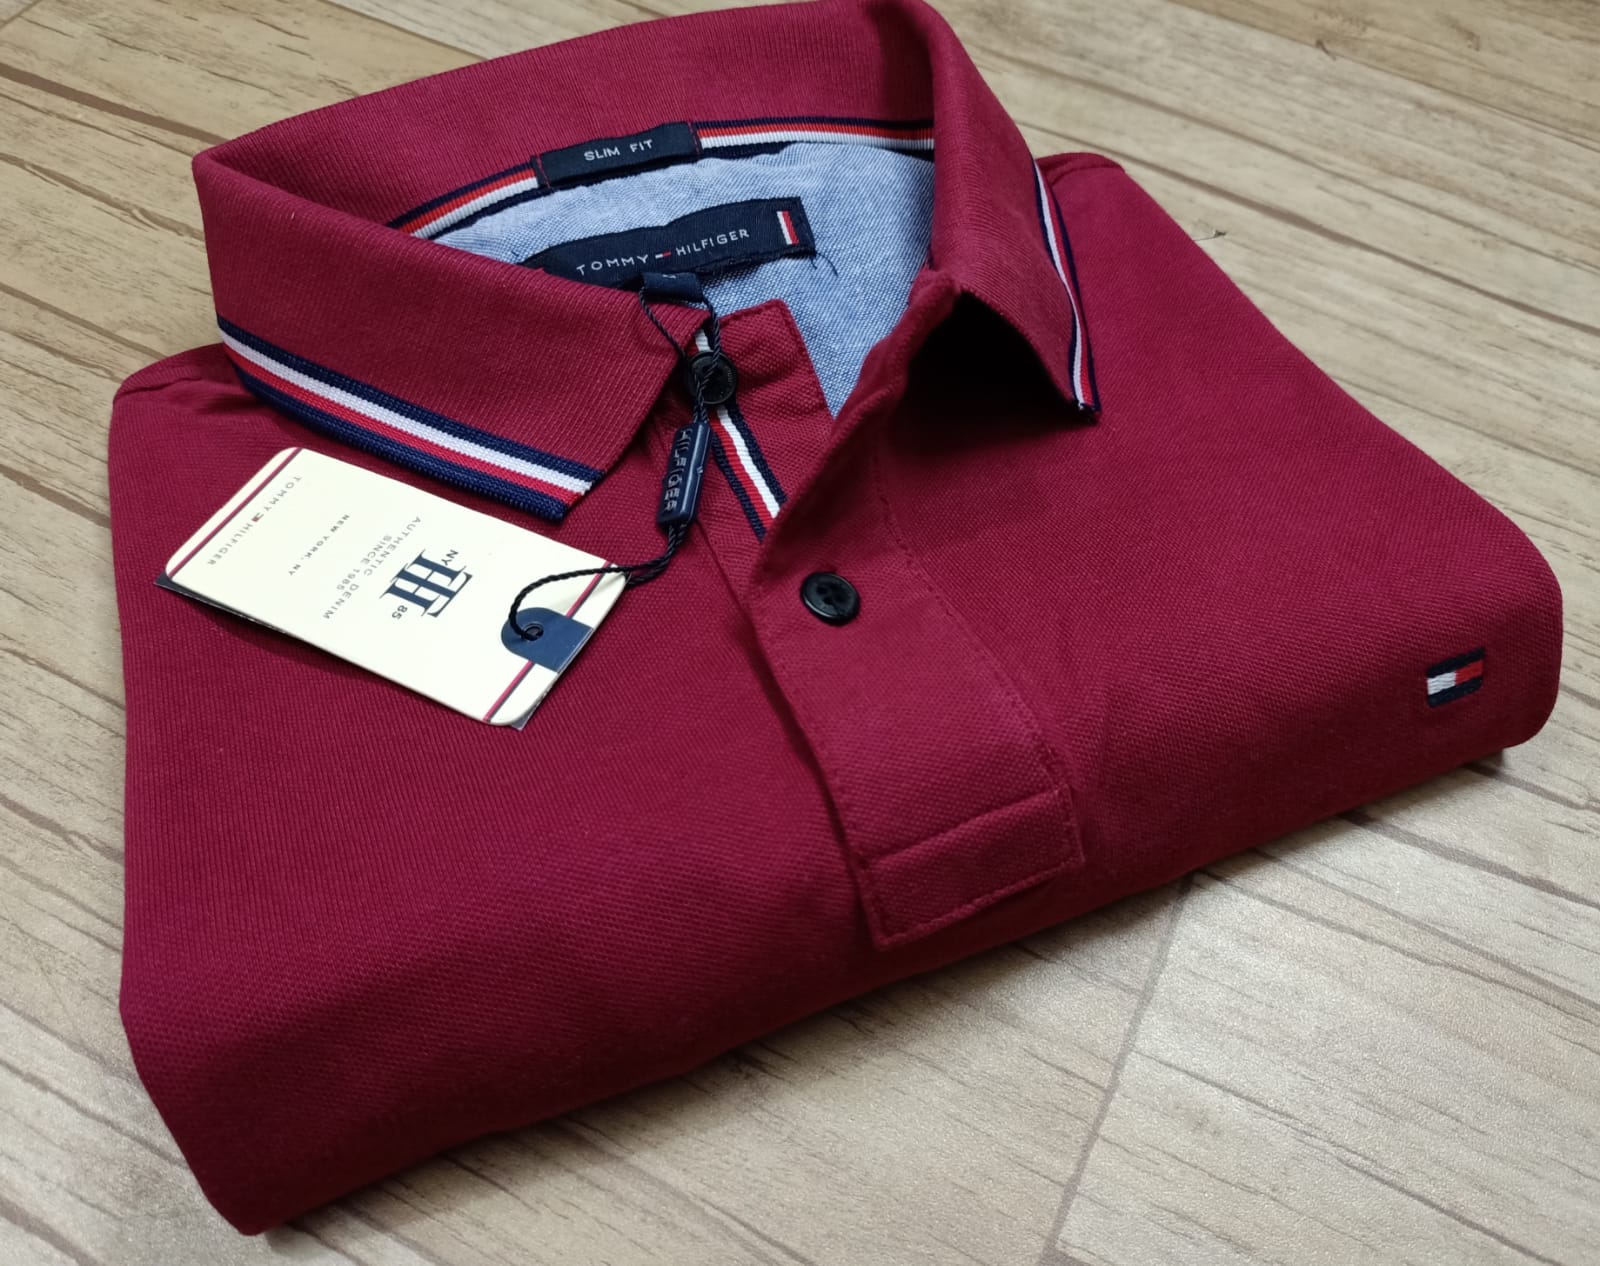 Imported Super Premium Cotton Polo Shirt For Men (ZAYSIPS13) - Maroon